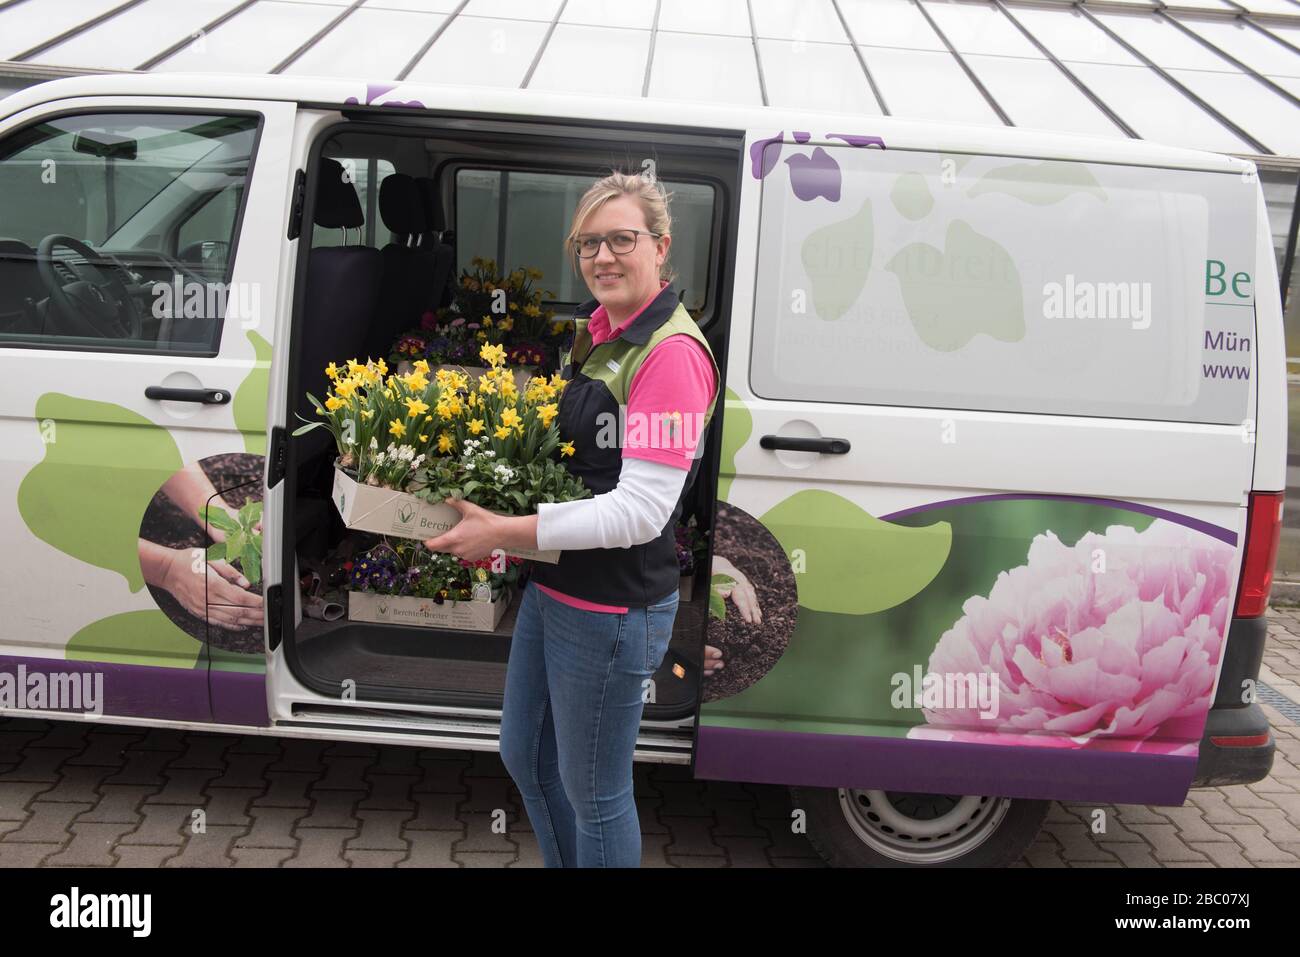 The Berchtenbreiter nursery in Obergiesing has set up a flower taxi to supply its customers with flowers during the corona-related exit restrictions. The picture shows Alexandra Berchtenbreiter with a spring mix box with ranunculus, primroses, forget-me-nots and bulbous flowers. [automated translation] Stock Photo